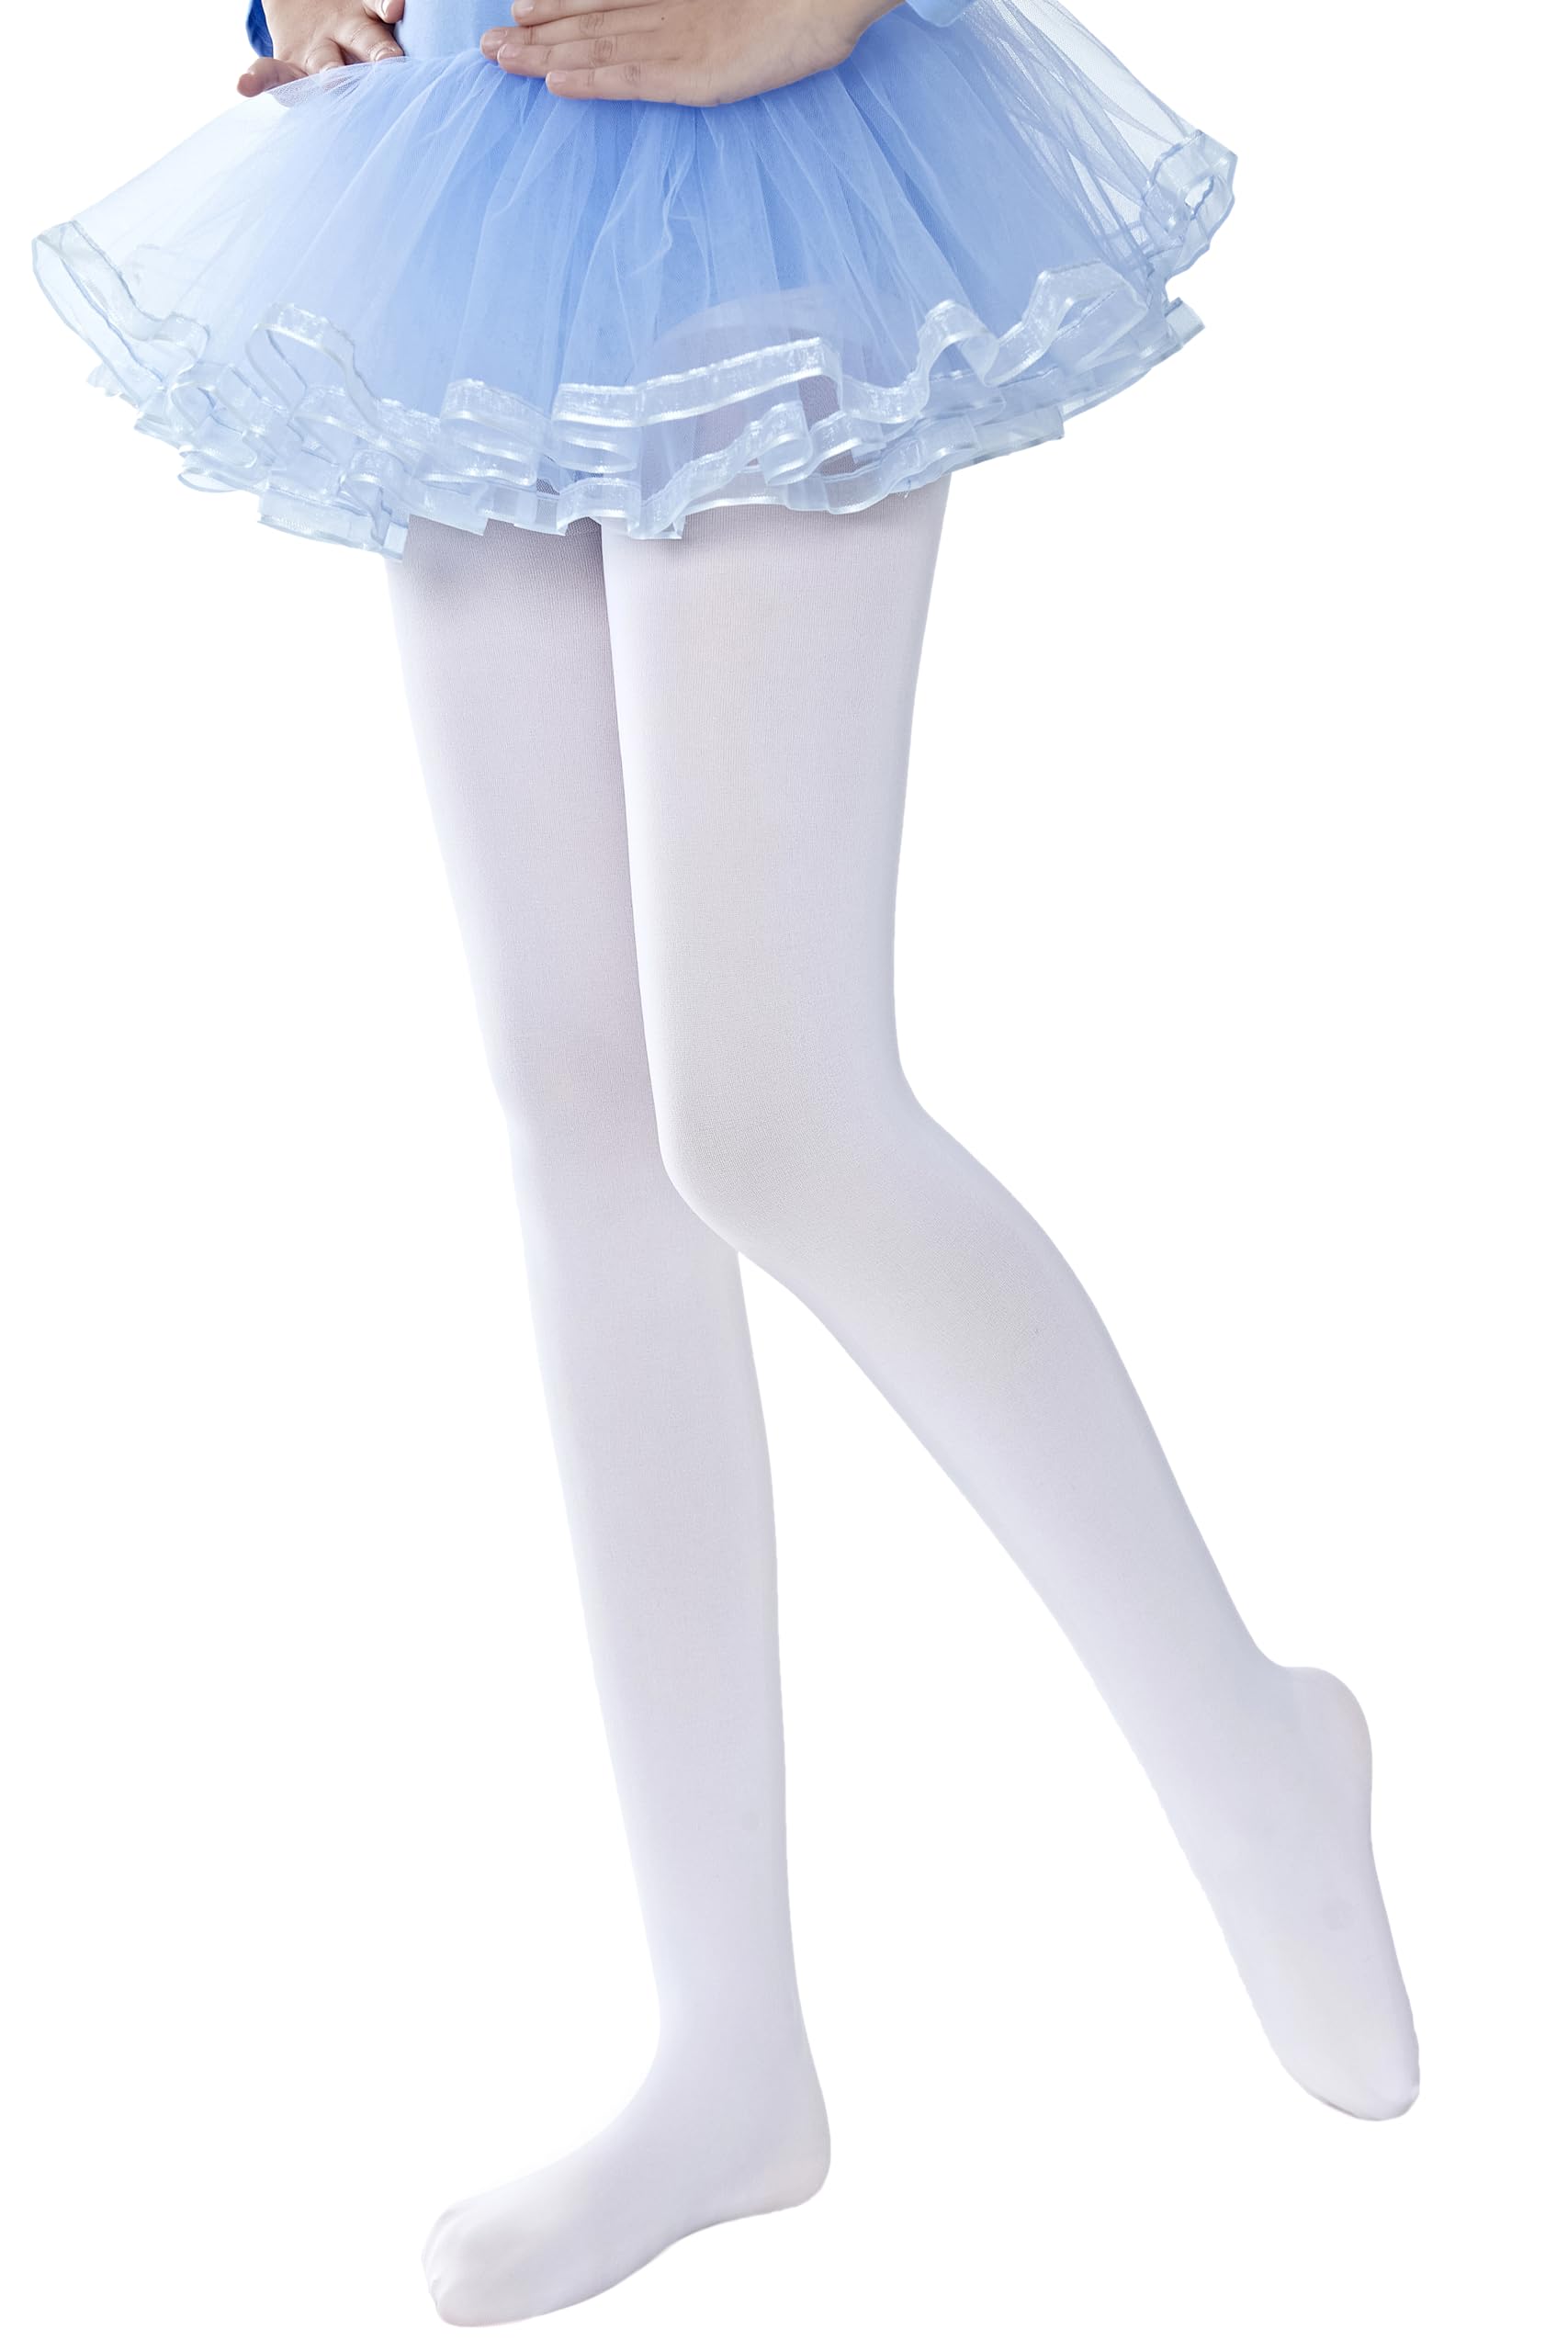 leg elegant Girls Microfiber Soft Opaque Footed Tights and Stockings